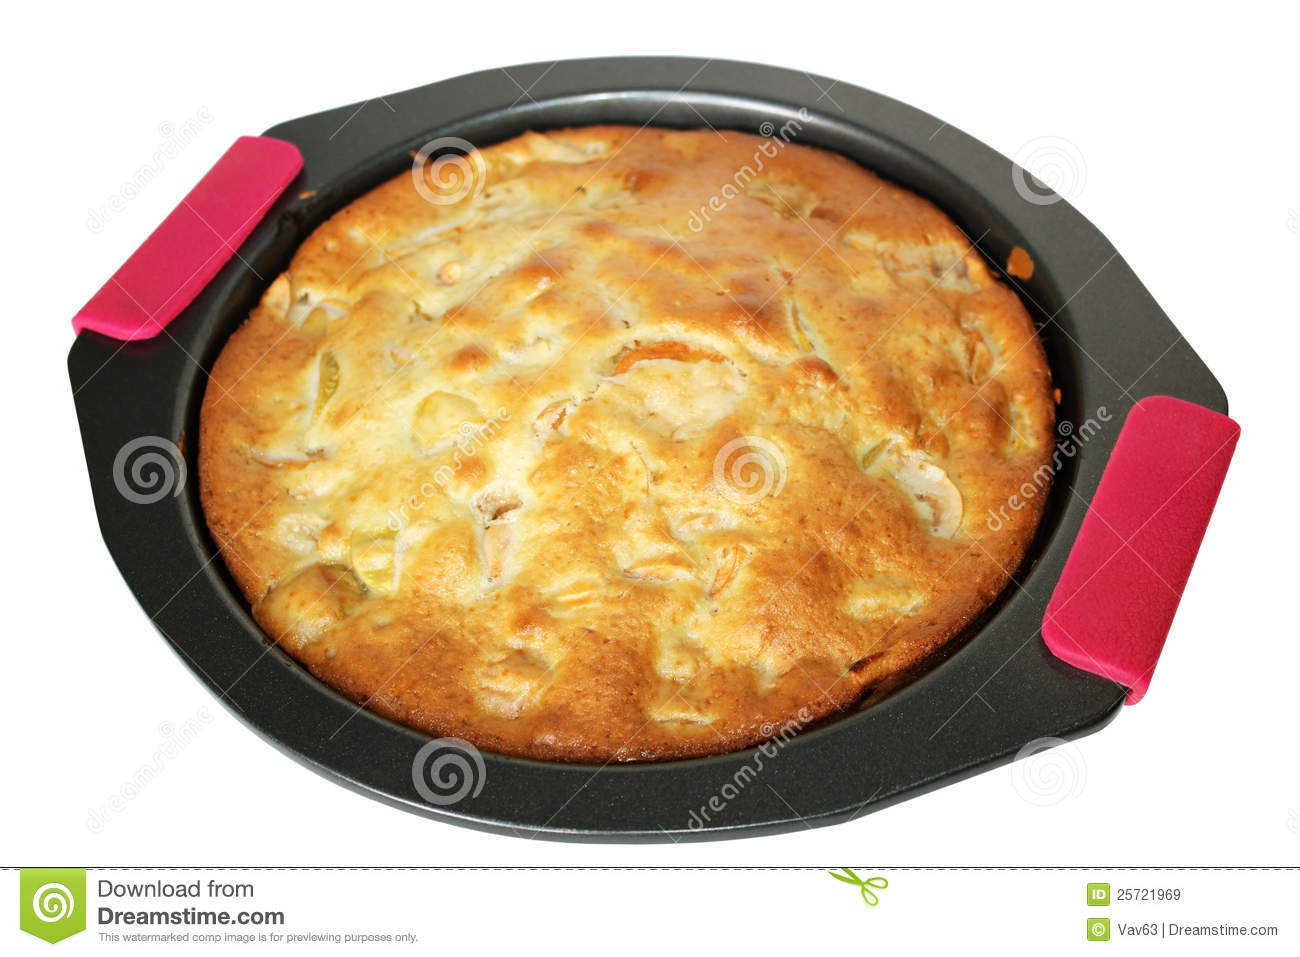 Apple Pie  Royalty Free Stock Images   Image  25721969